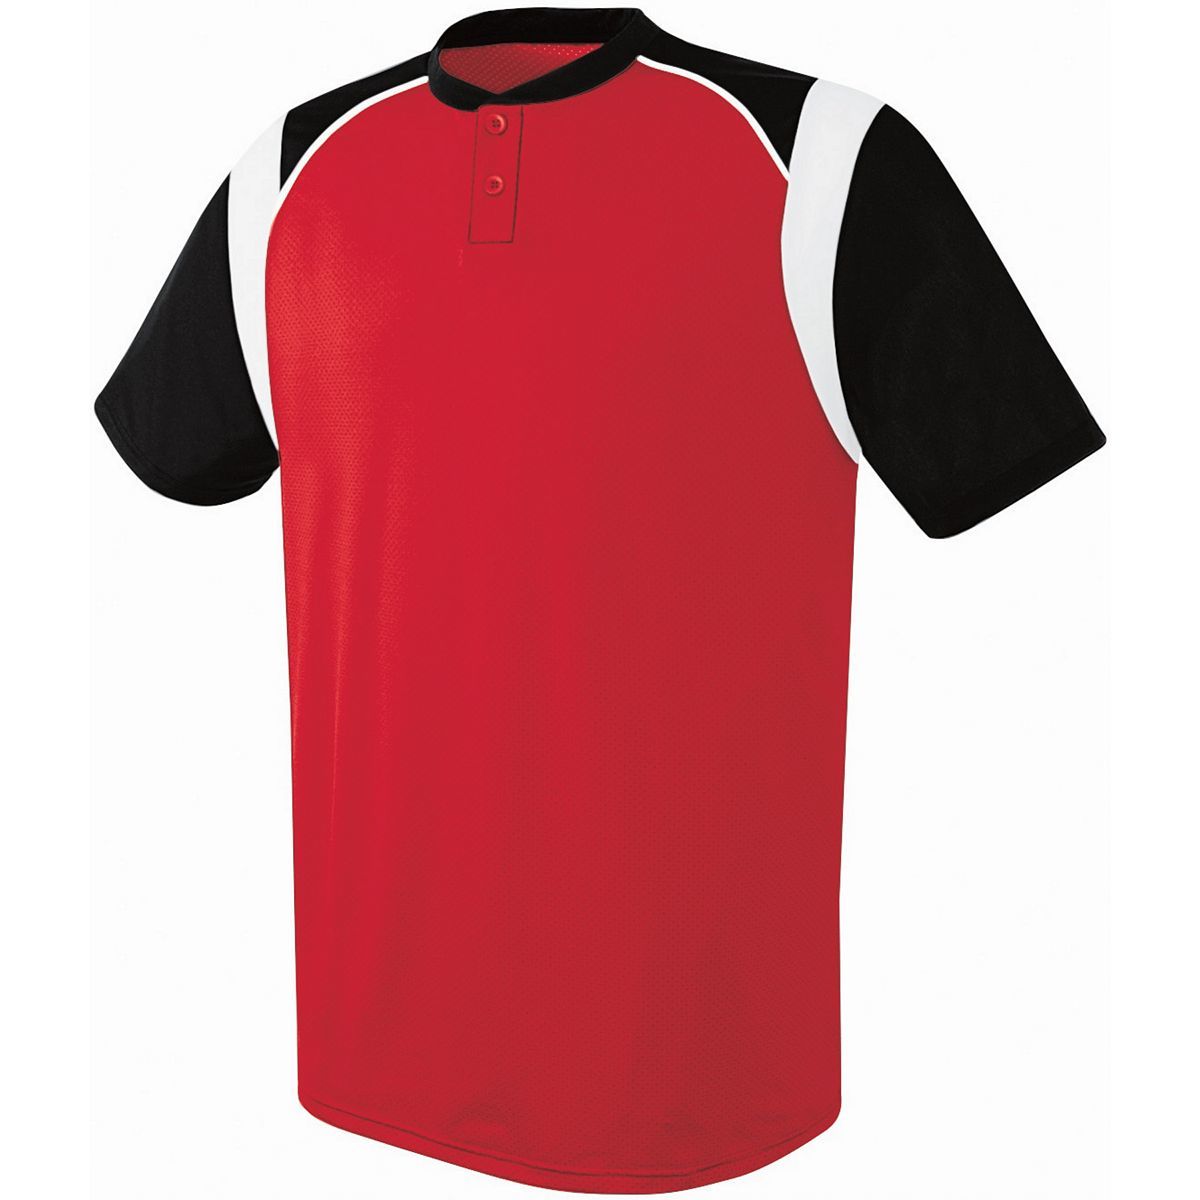 Augusta Sportswear Wildcard Two-Button Jersey in Scarlet/Black/White  -Part of the Adult, Adult-Jersey, Augusta-Products, Baseball, Shirts, All-Sports, All-Sports-1 product lines at KanaleyCreations.com